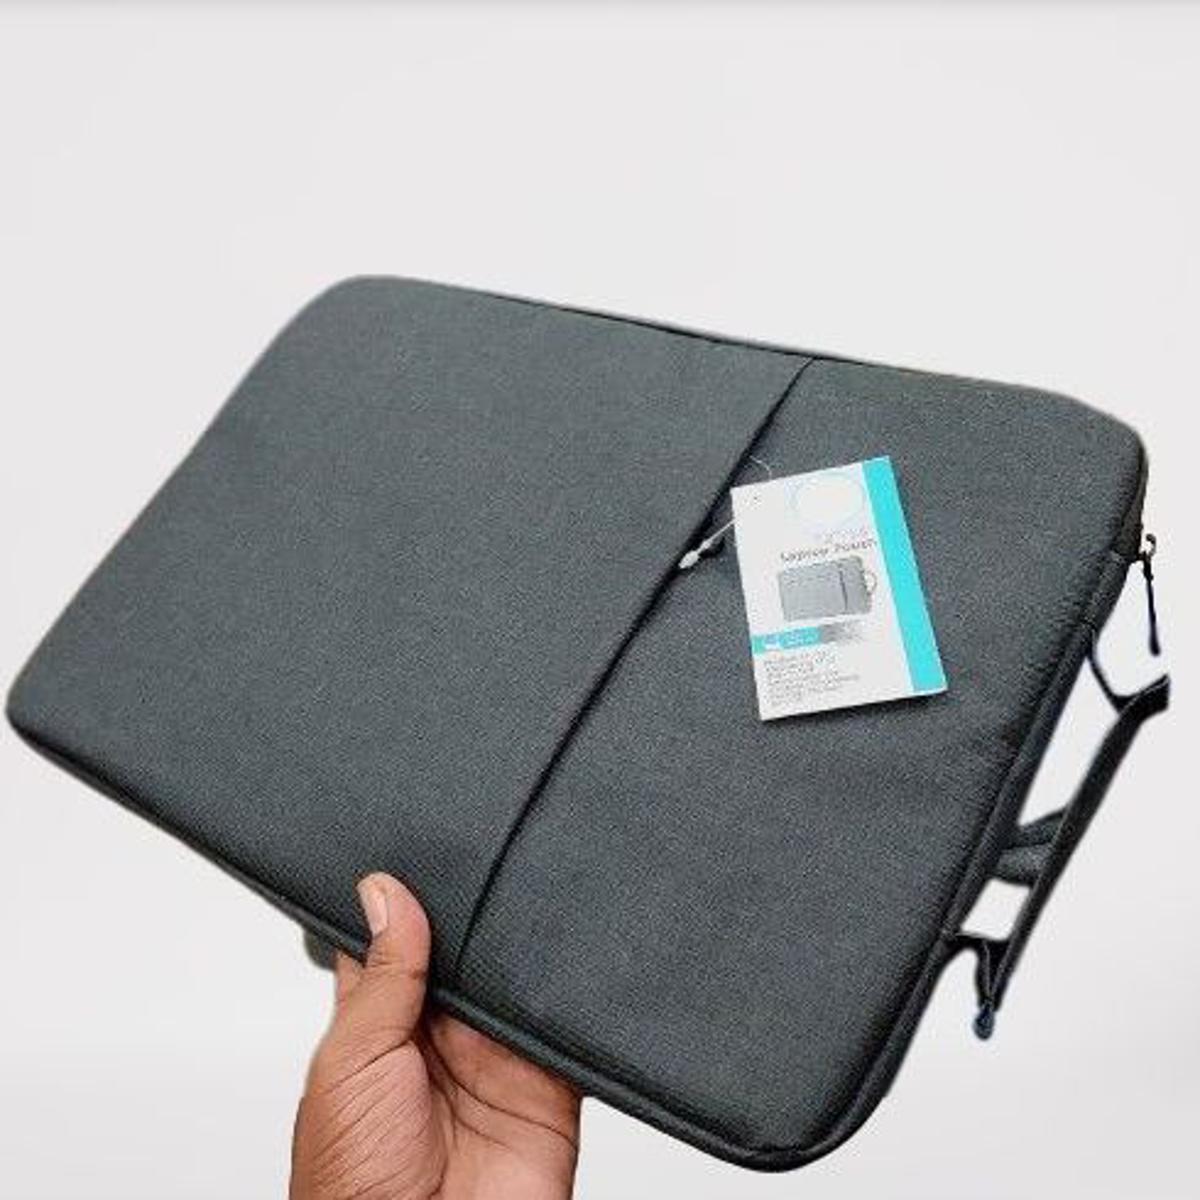 Slim & Protective Laptop Carrying Cases | Higher Ground Gear